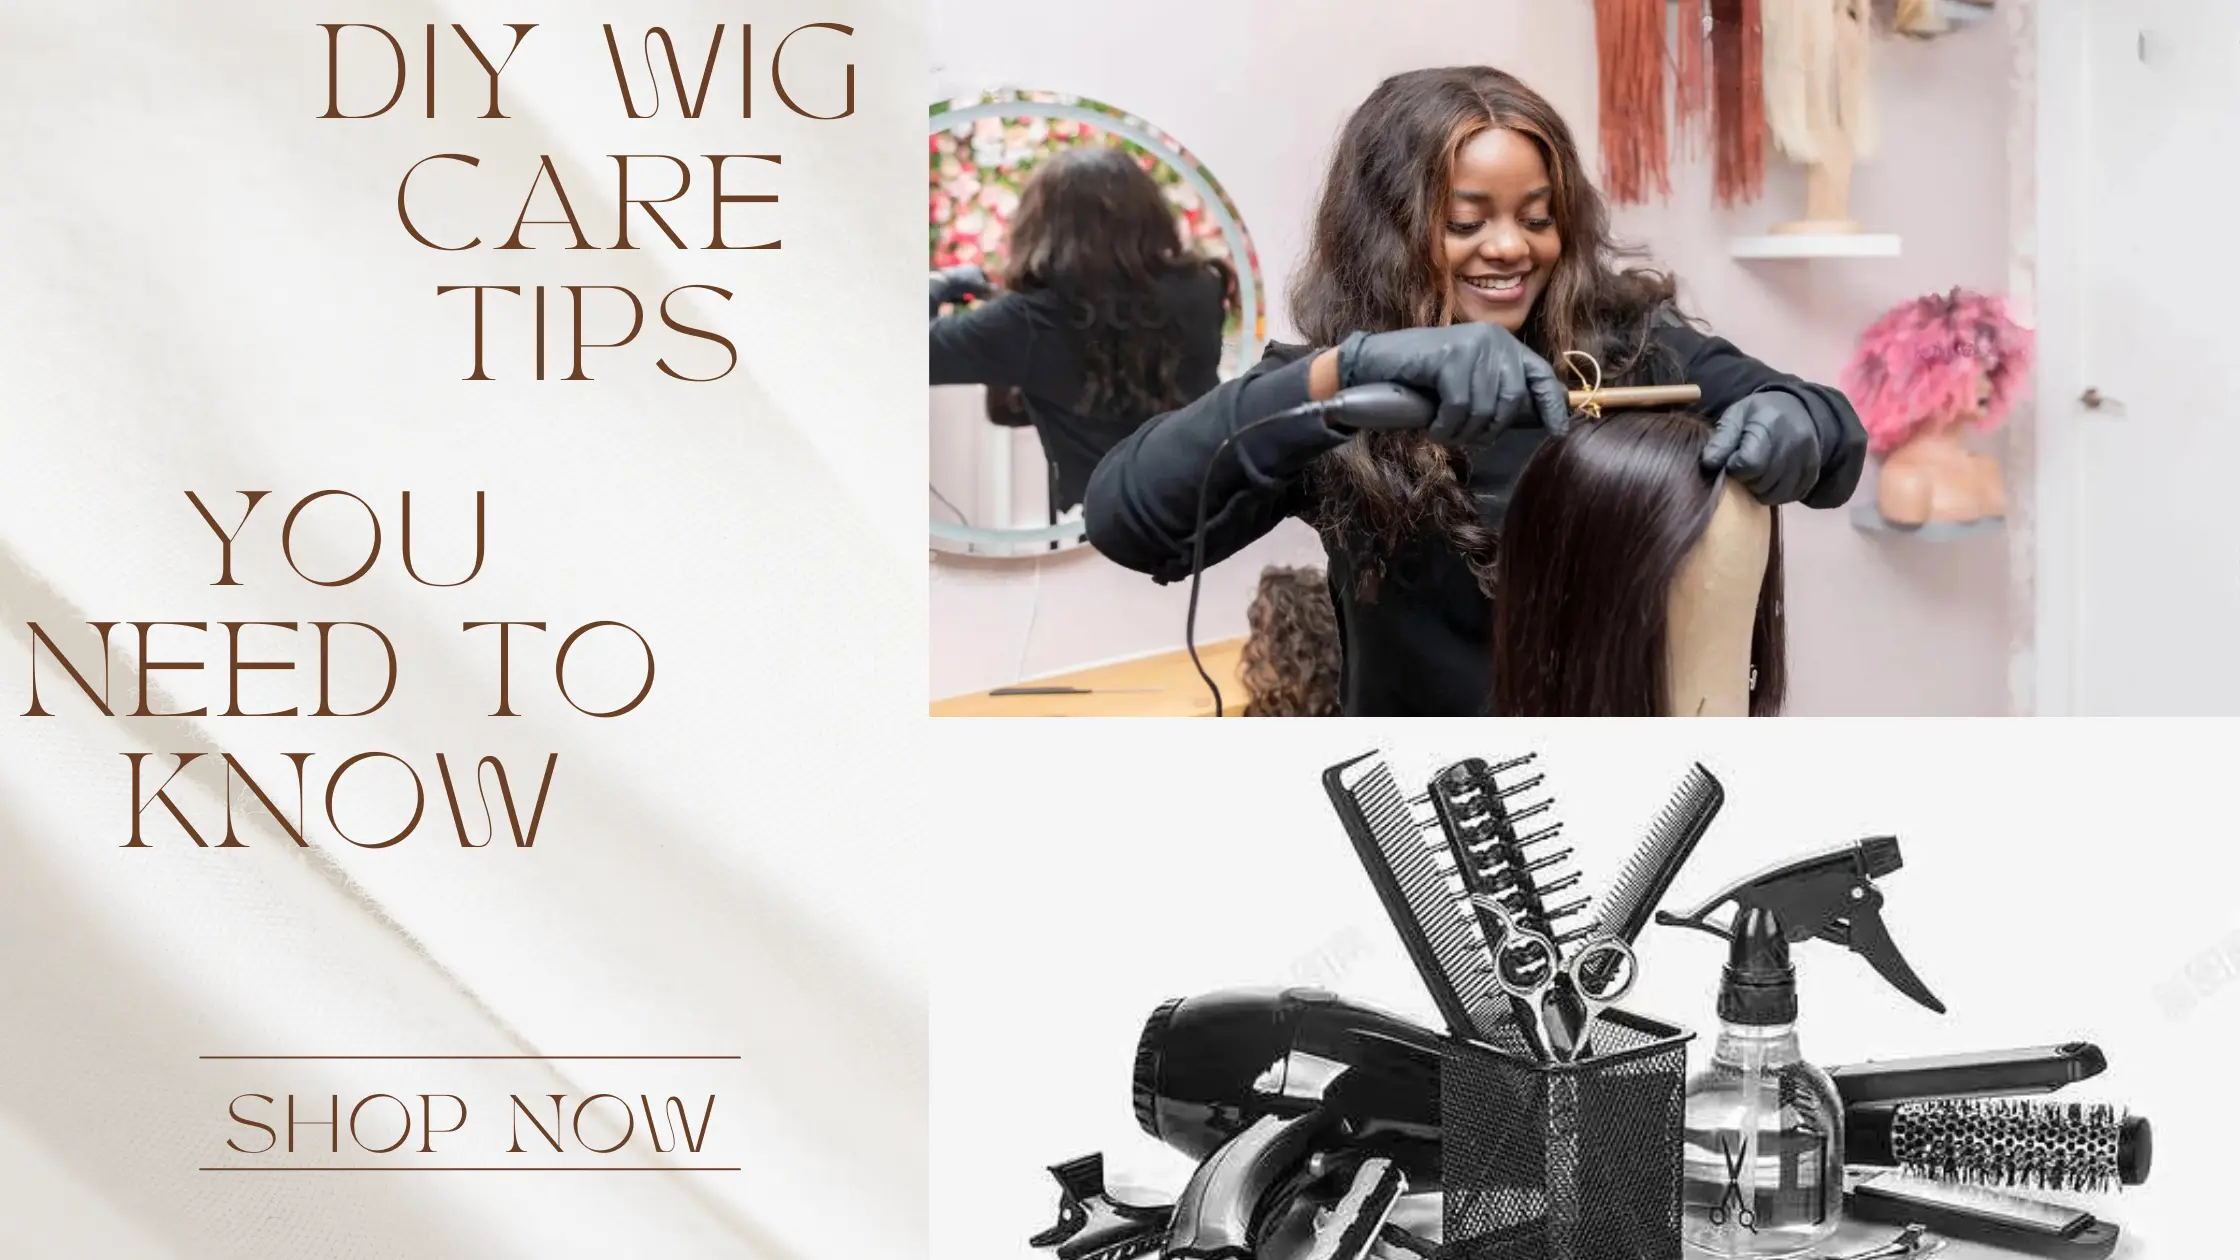 DIY Wig Care Tips You Need to Know